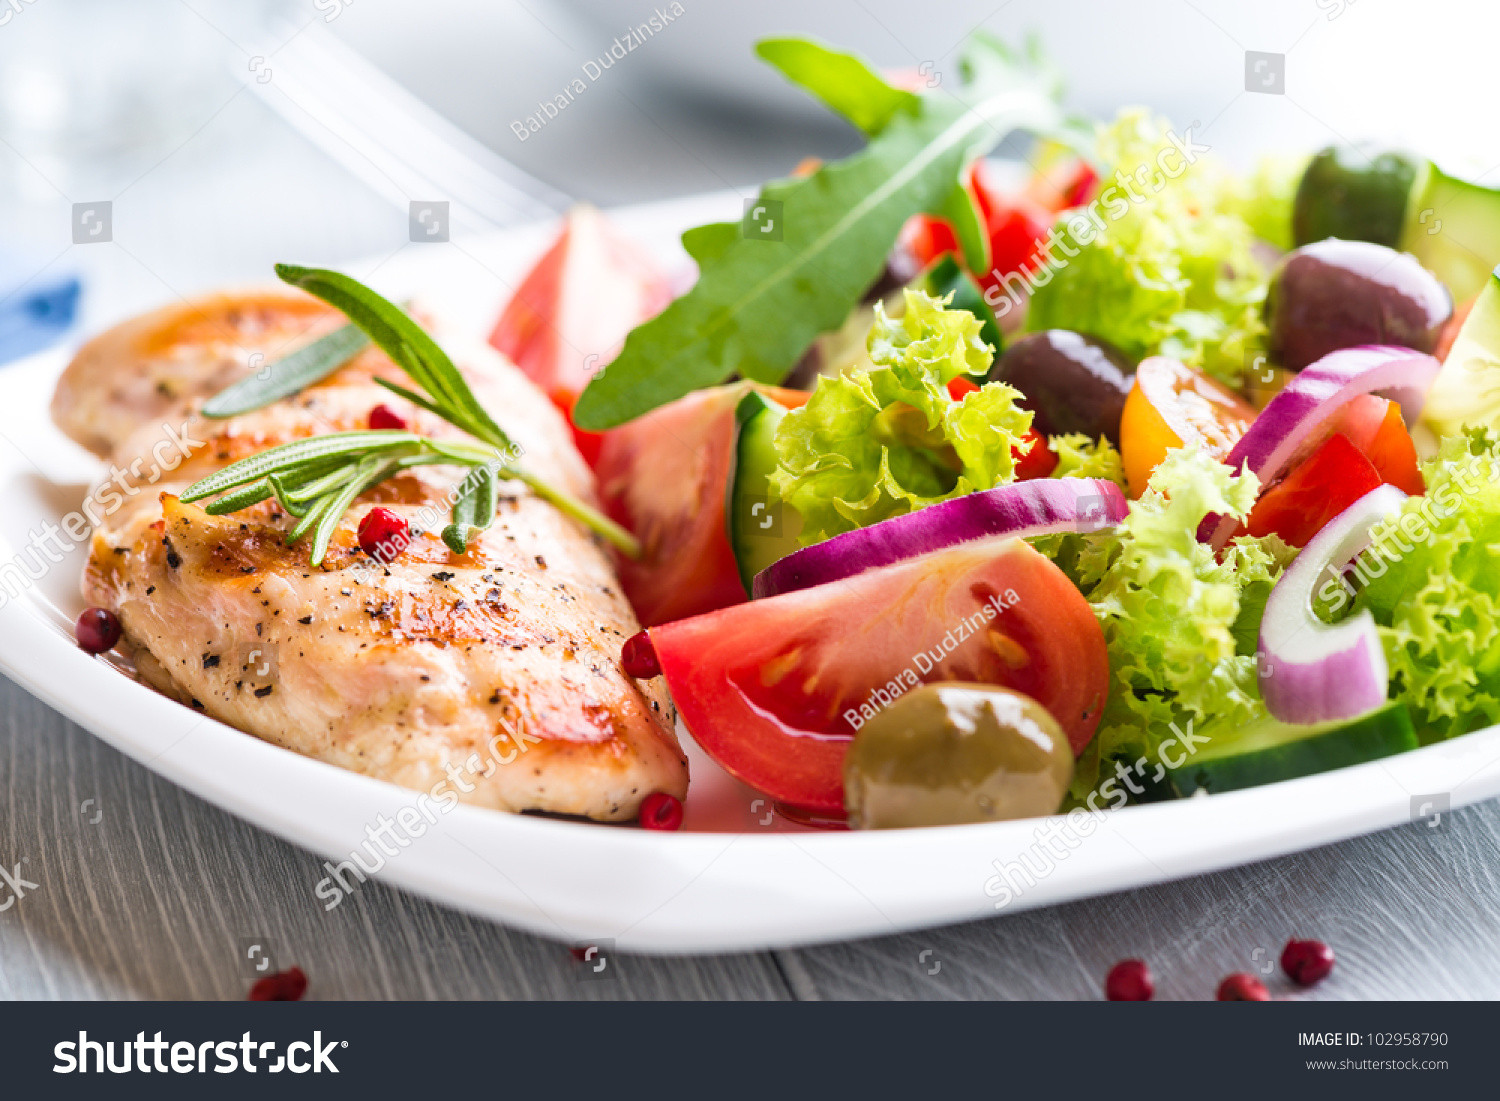 Chicken Breast For Salad
 Grilled Chicken Breast With Salad Stock